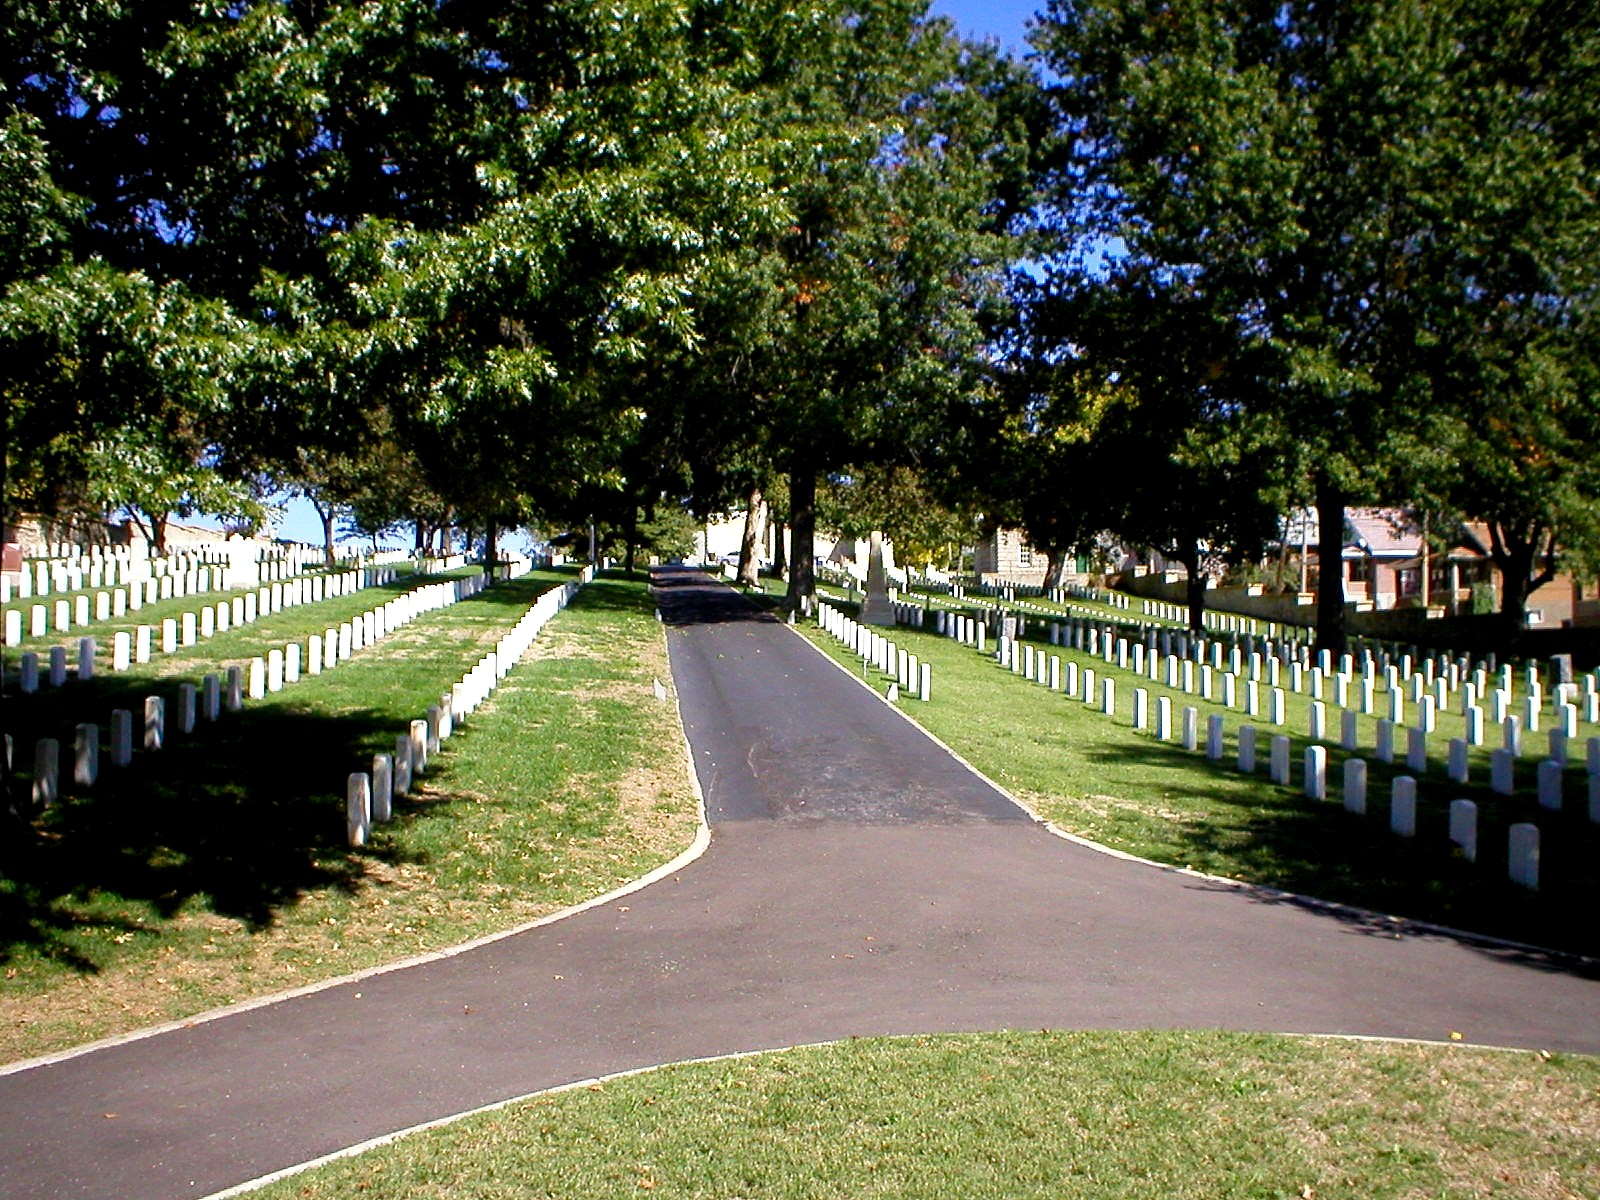 Picture of a cemetery's roads